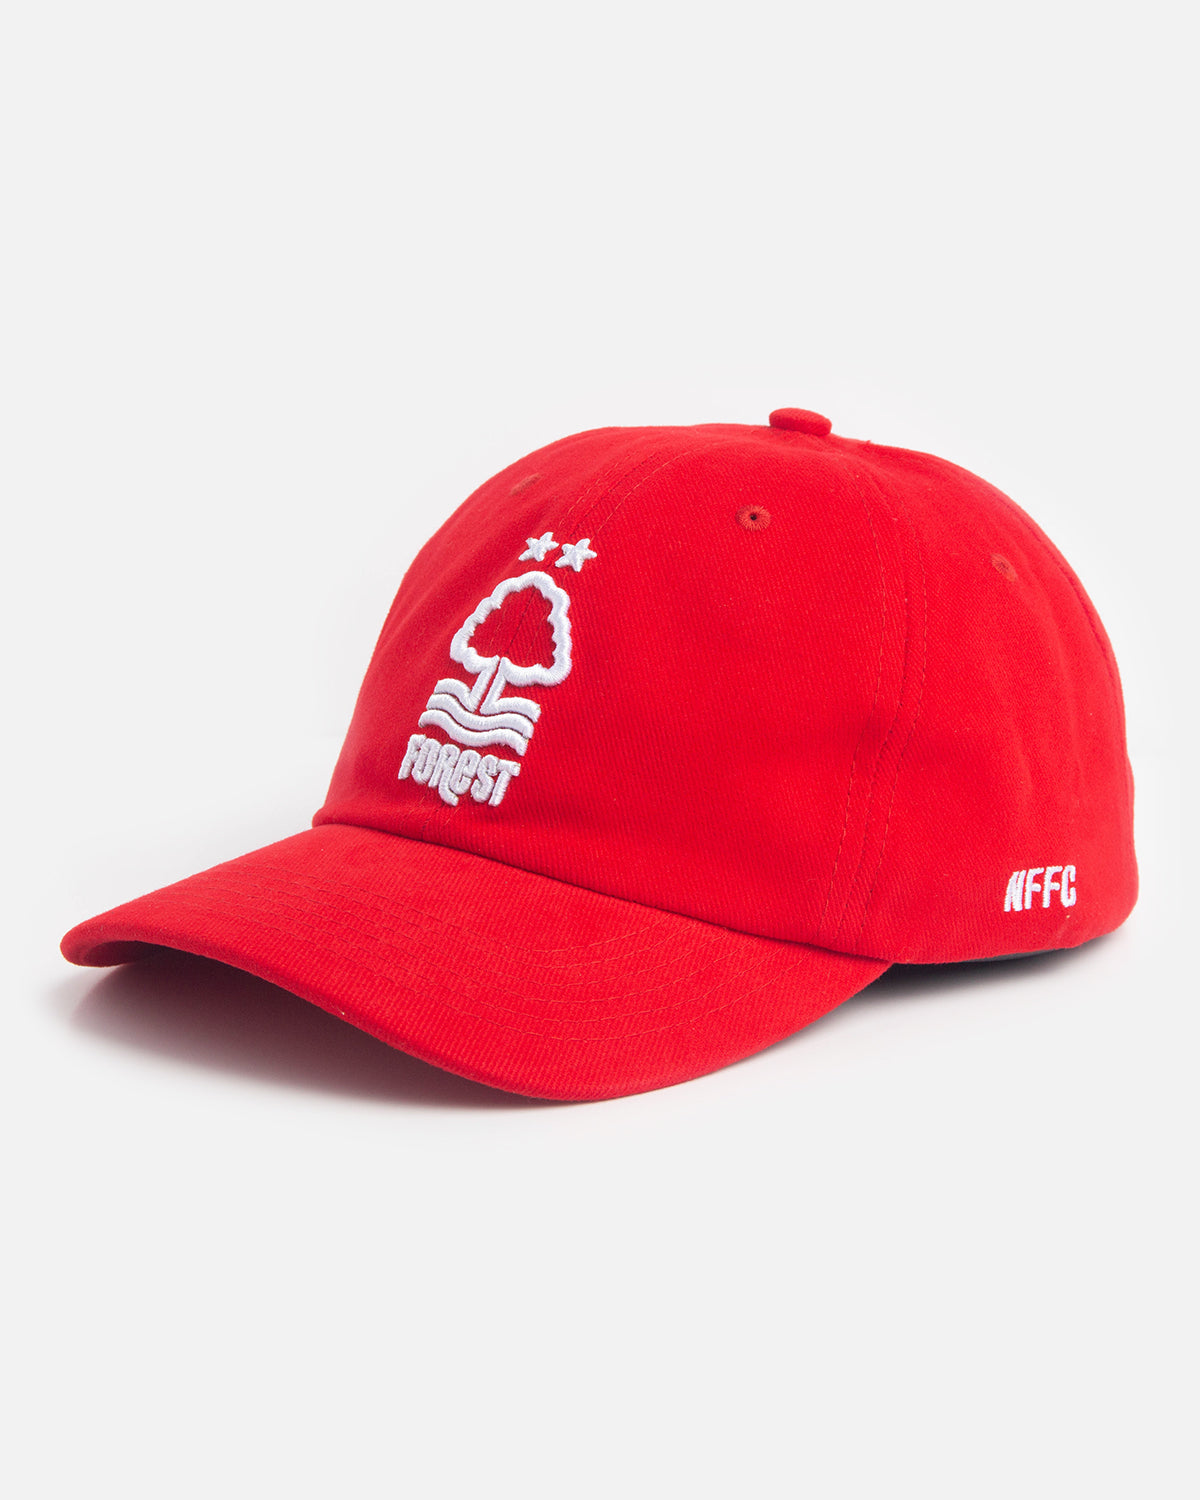 NFFC Red Relaxed fit Cap